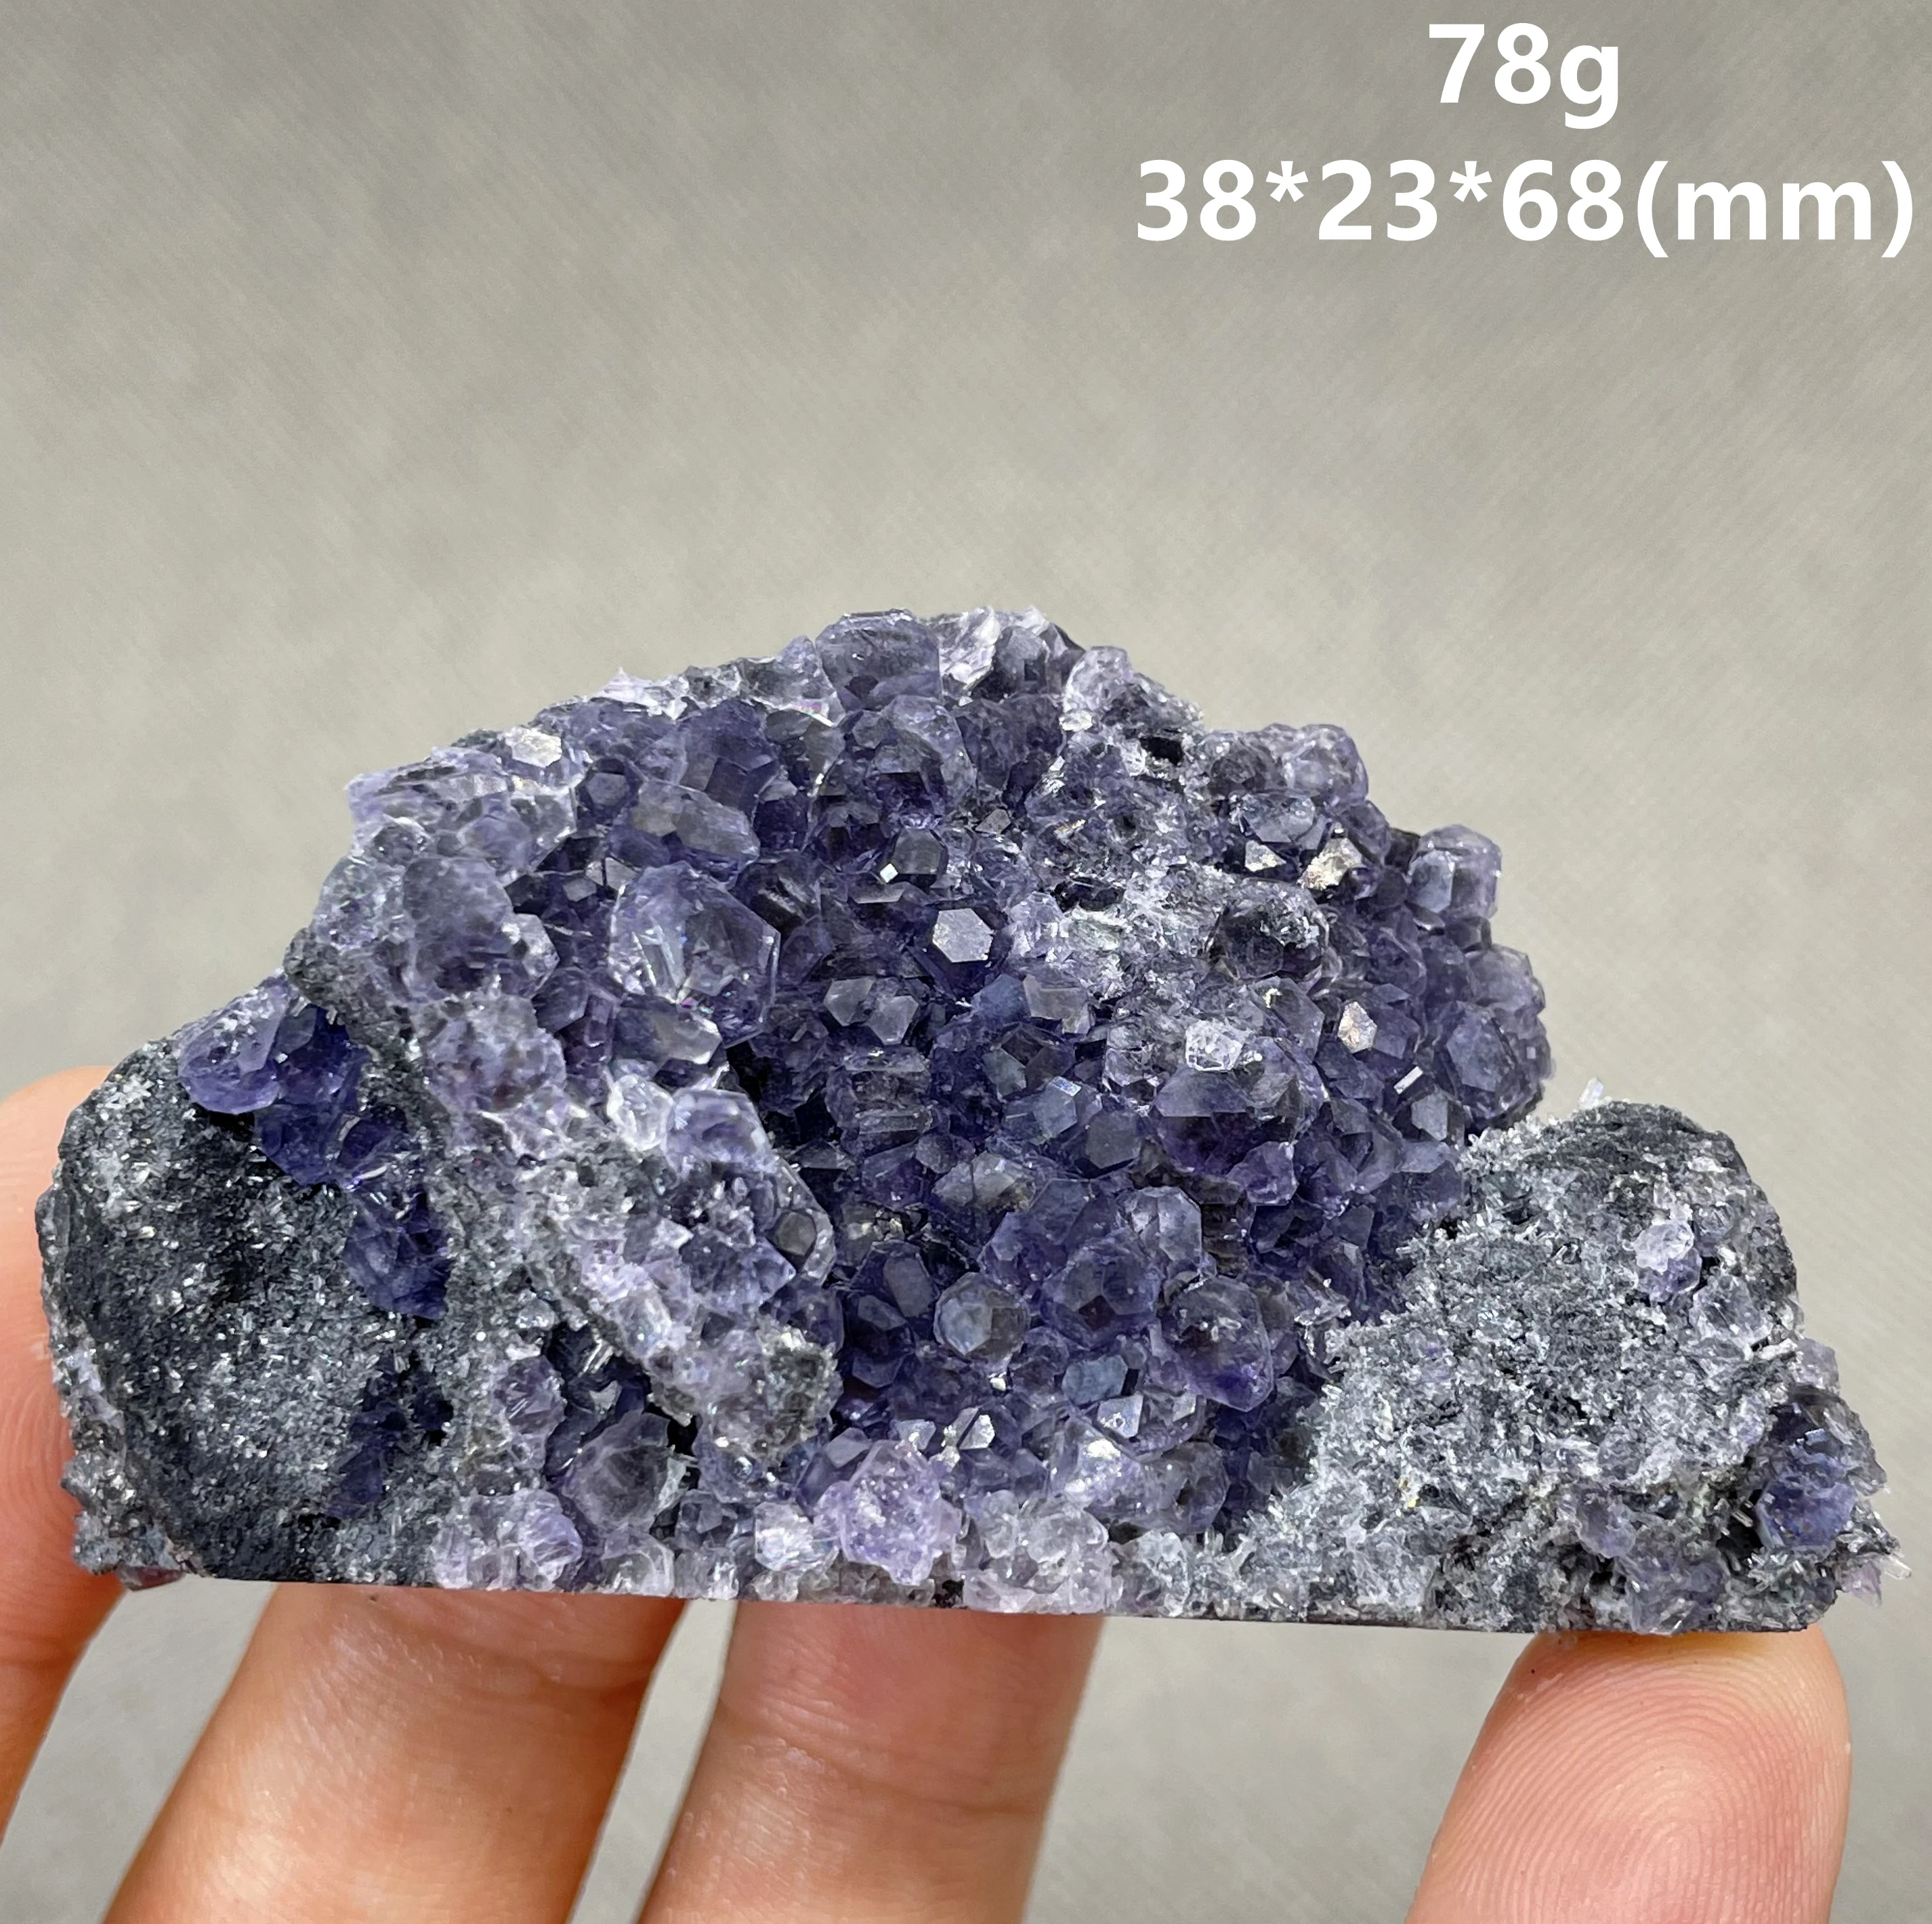 

NEW! BEST! 100% Natural Polyhedral Tanzanite blue Purple fluorite cluster mineral specimens Gem level Stones and crystals